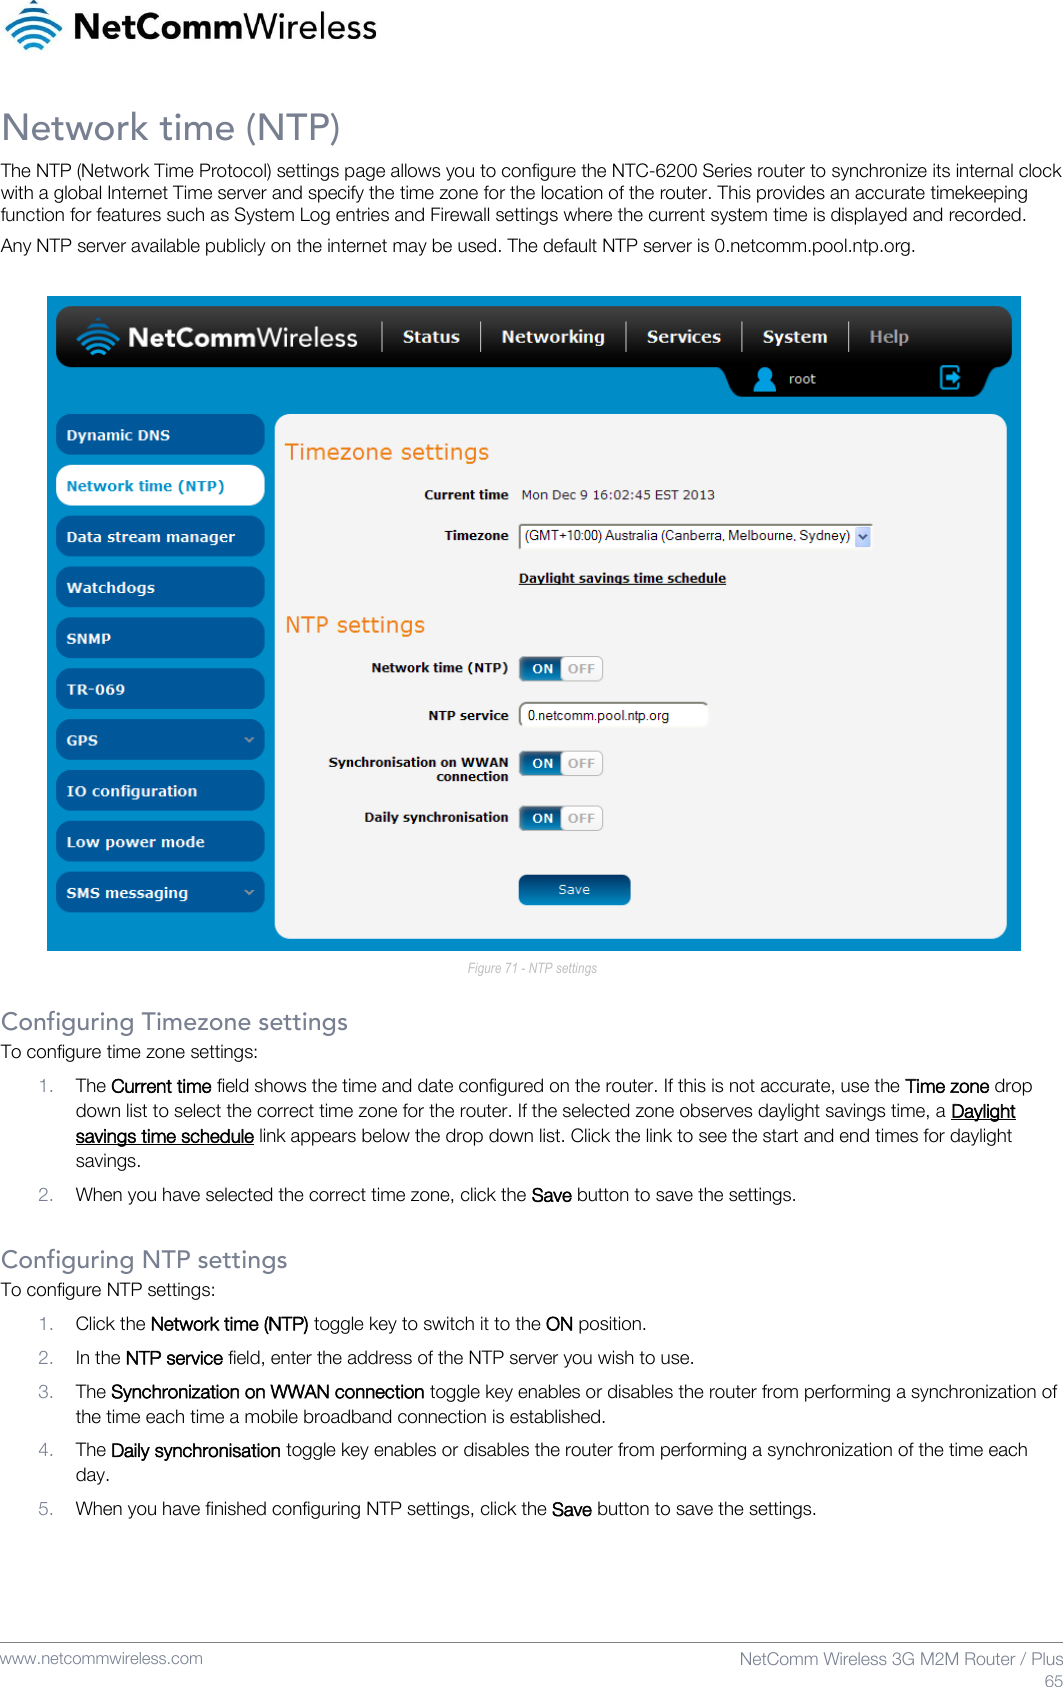    www.netcommwireless.com  NetComm Wireless 3G M2M Router / Plus  65 Network time (NTP) The NTP (Network Time Protocol) settings page allows you to configure the NTC-6200 Series router to synchronize its internal clock with a global Internet Time server and specify the time zone for the location of the router. This provides an accurate timekeeping function for features such as System Log entries and Firewall settings where the current system time is displayed and recorded. Any NTP server available publicly on the internet may be used. The default NTP server is 0.netcomm.pool.ntp.org.   Figure 71 - NTP settings  Configuring Timezone settings To configure time zone settings: 1. The Current time field shows the time and date configured on the router. If this is not accurate, use the Time zone drop down list to select the correct time zone for the router. If the selected zone observes daylight savings time, a Daylight savings time schedule link appears below the drop down list. Click the link to see the start and end times for daylight savings. 2. When you have selected the correct time zone, click the Save button to save the settings.  Configuring NTP settings To configure NTP settings: 1. Click the Network time (NTP) toggle key to switch it to the ON position. 2. In the NTP service field, enter the address of the NTP server you wish to use. 3. The Synchronization on WWAN connection toggle key enables or disables the router from performing a synchronization of the time each time a mobile broadband connection is established.  4. The Daily synchronisation toggle key enables or disables the router from performing a synchronization of the time each day. 5. When you have finished configuring NTP settings, click the Save button to save the settings.    